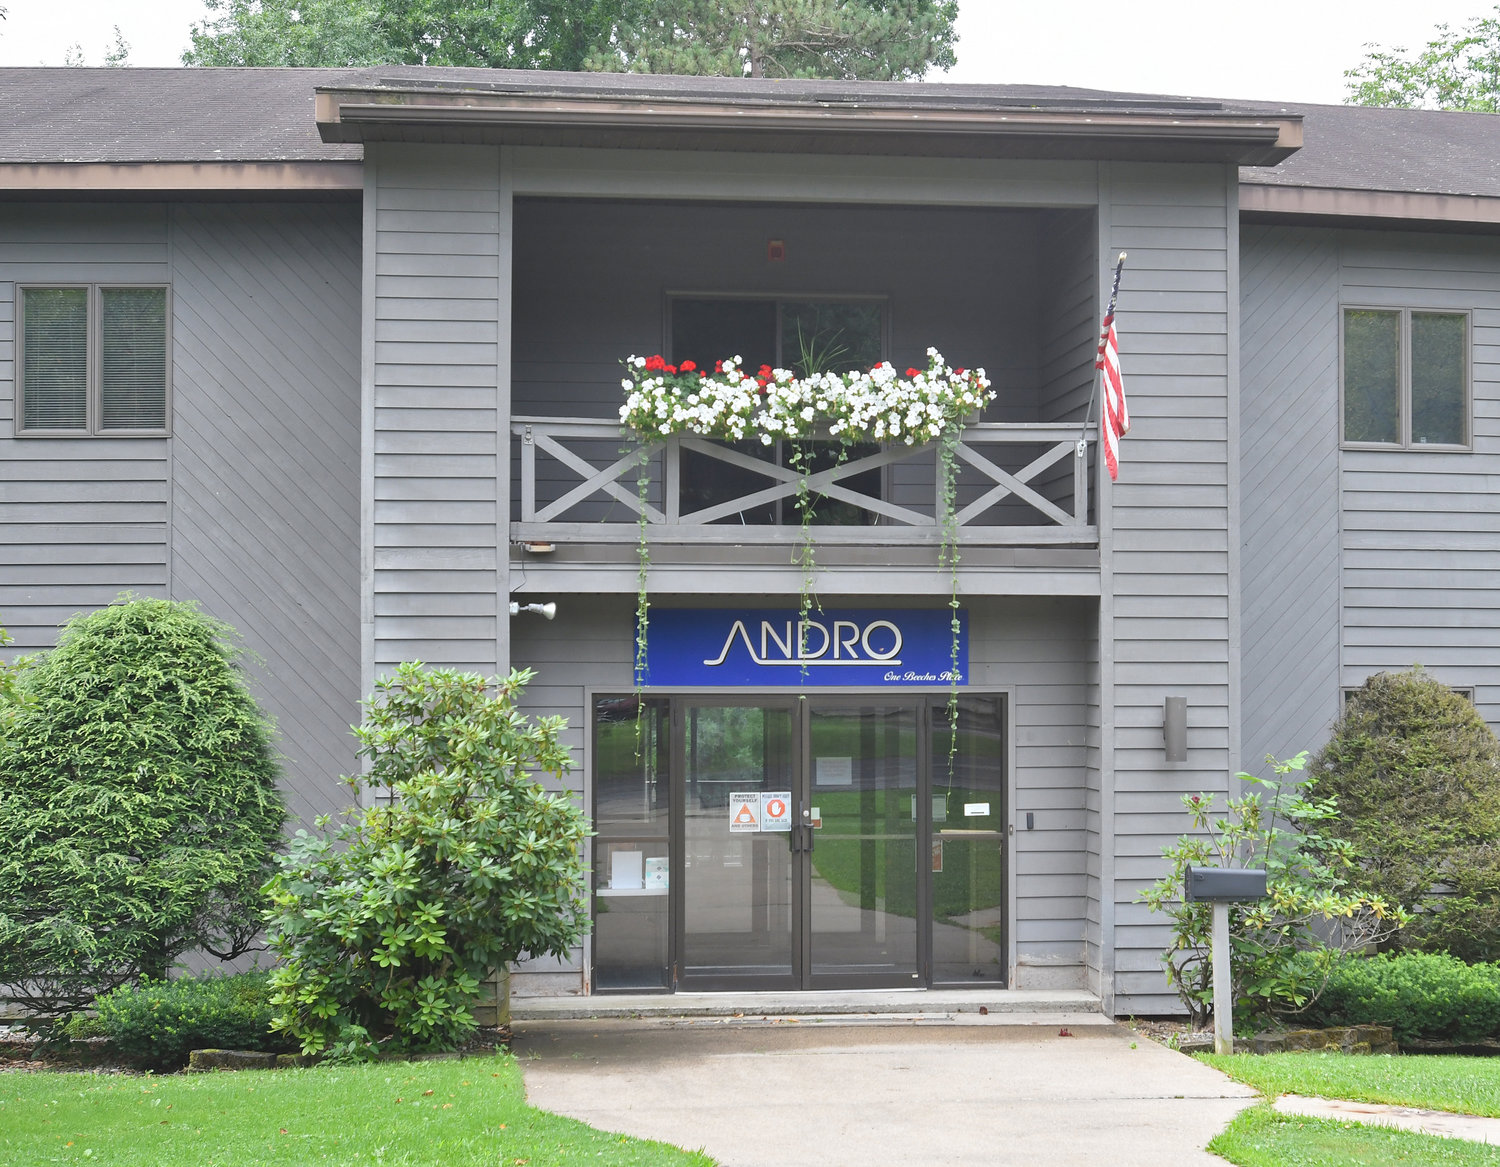 Pictured is the exterior of Andro on the Beeches Campus.